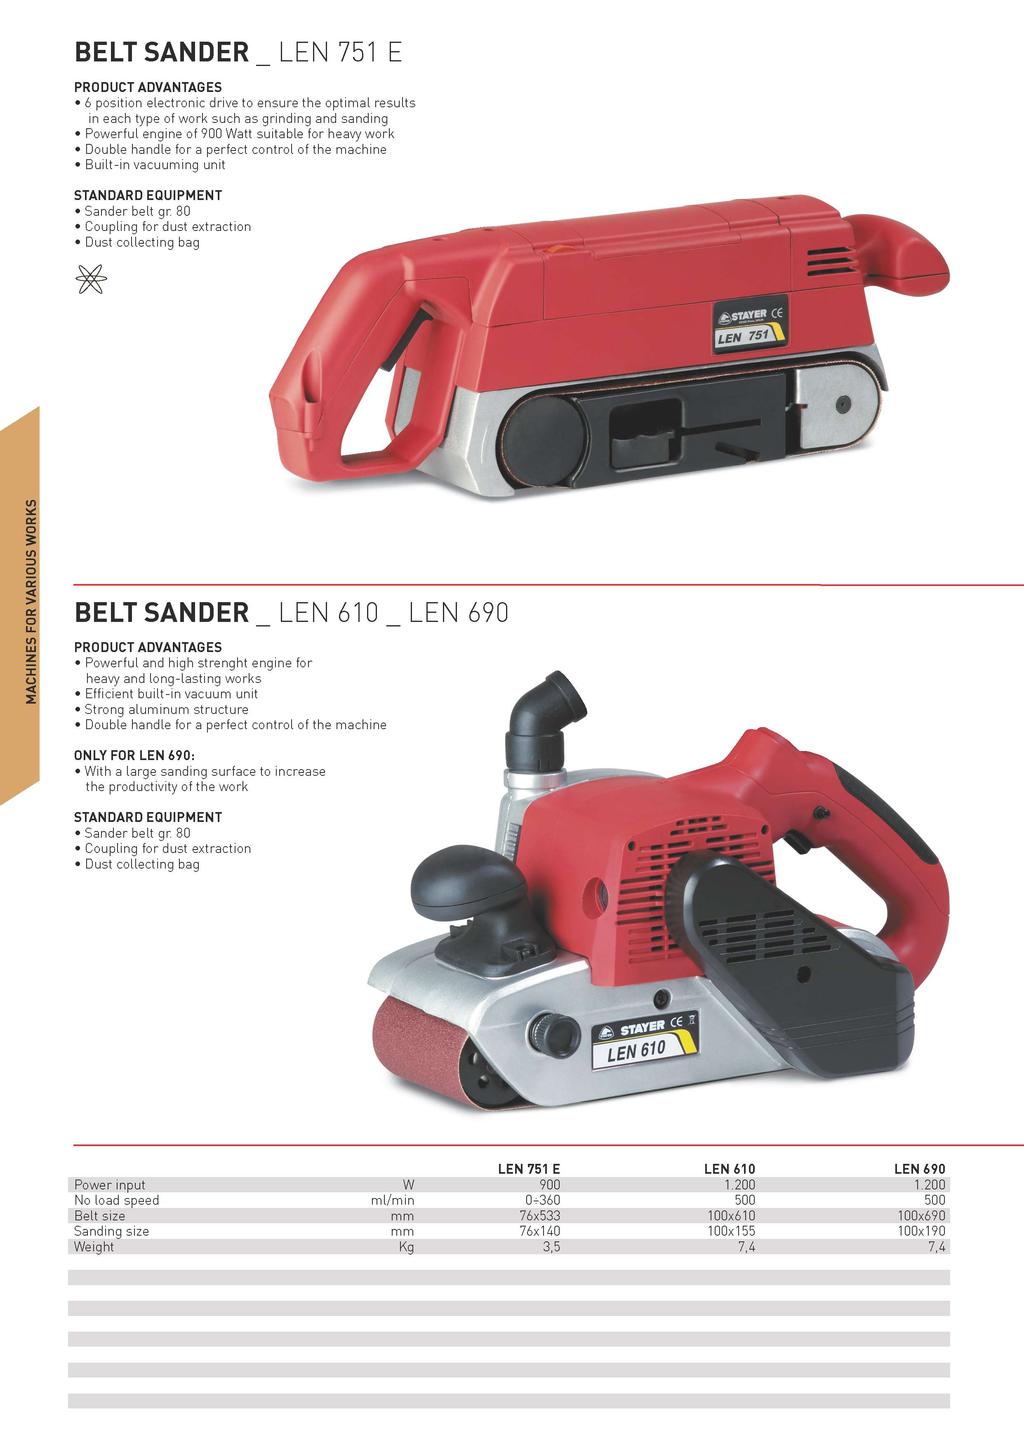 BELT SANDER _ LEN 751 E 6 position electronic drive to ensure the optimal results in each type of work such as grinding and sanding Powerful engine of 900 Watt suitable for heavy work Double handle